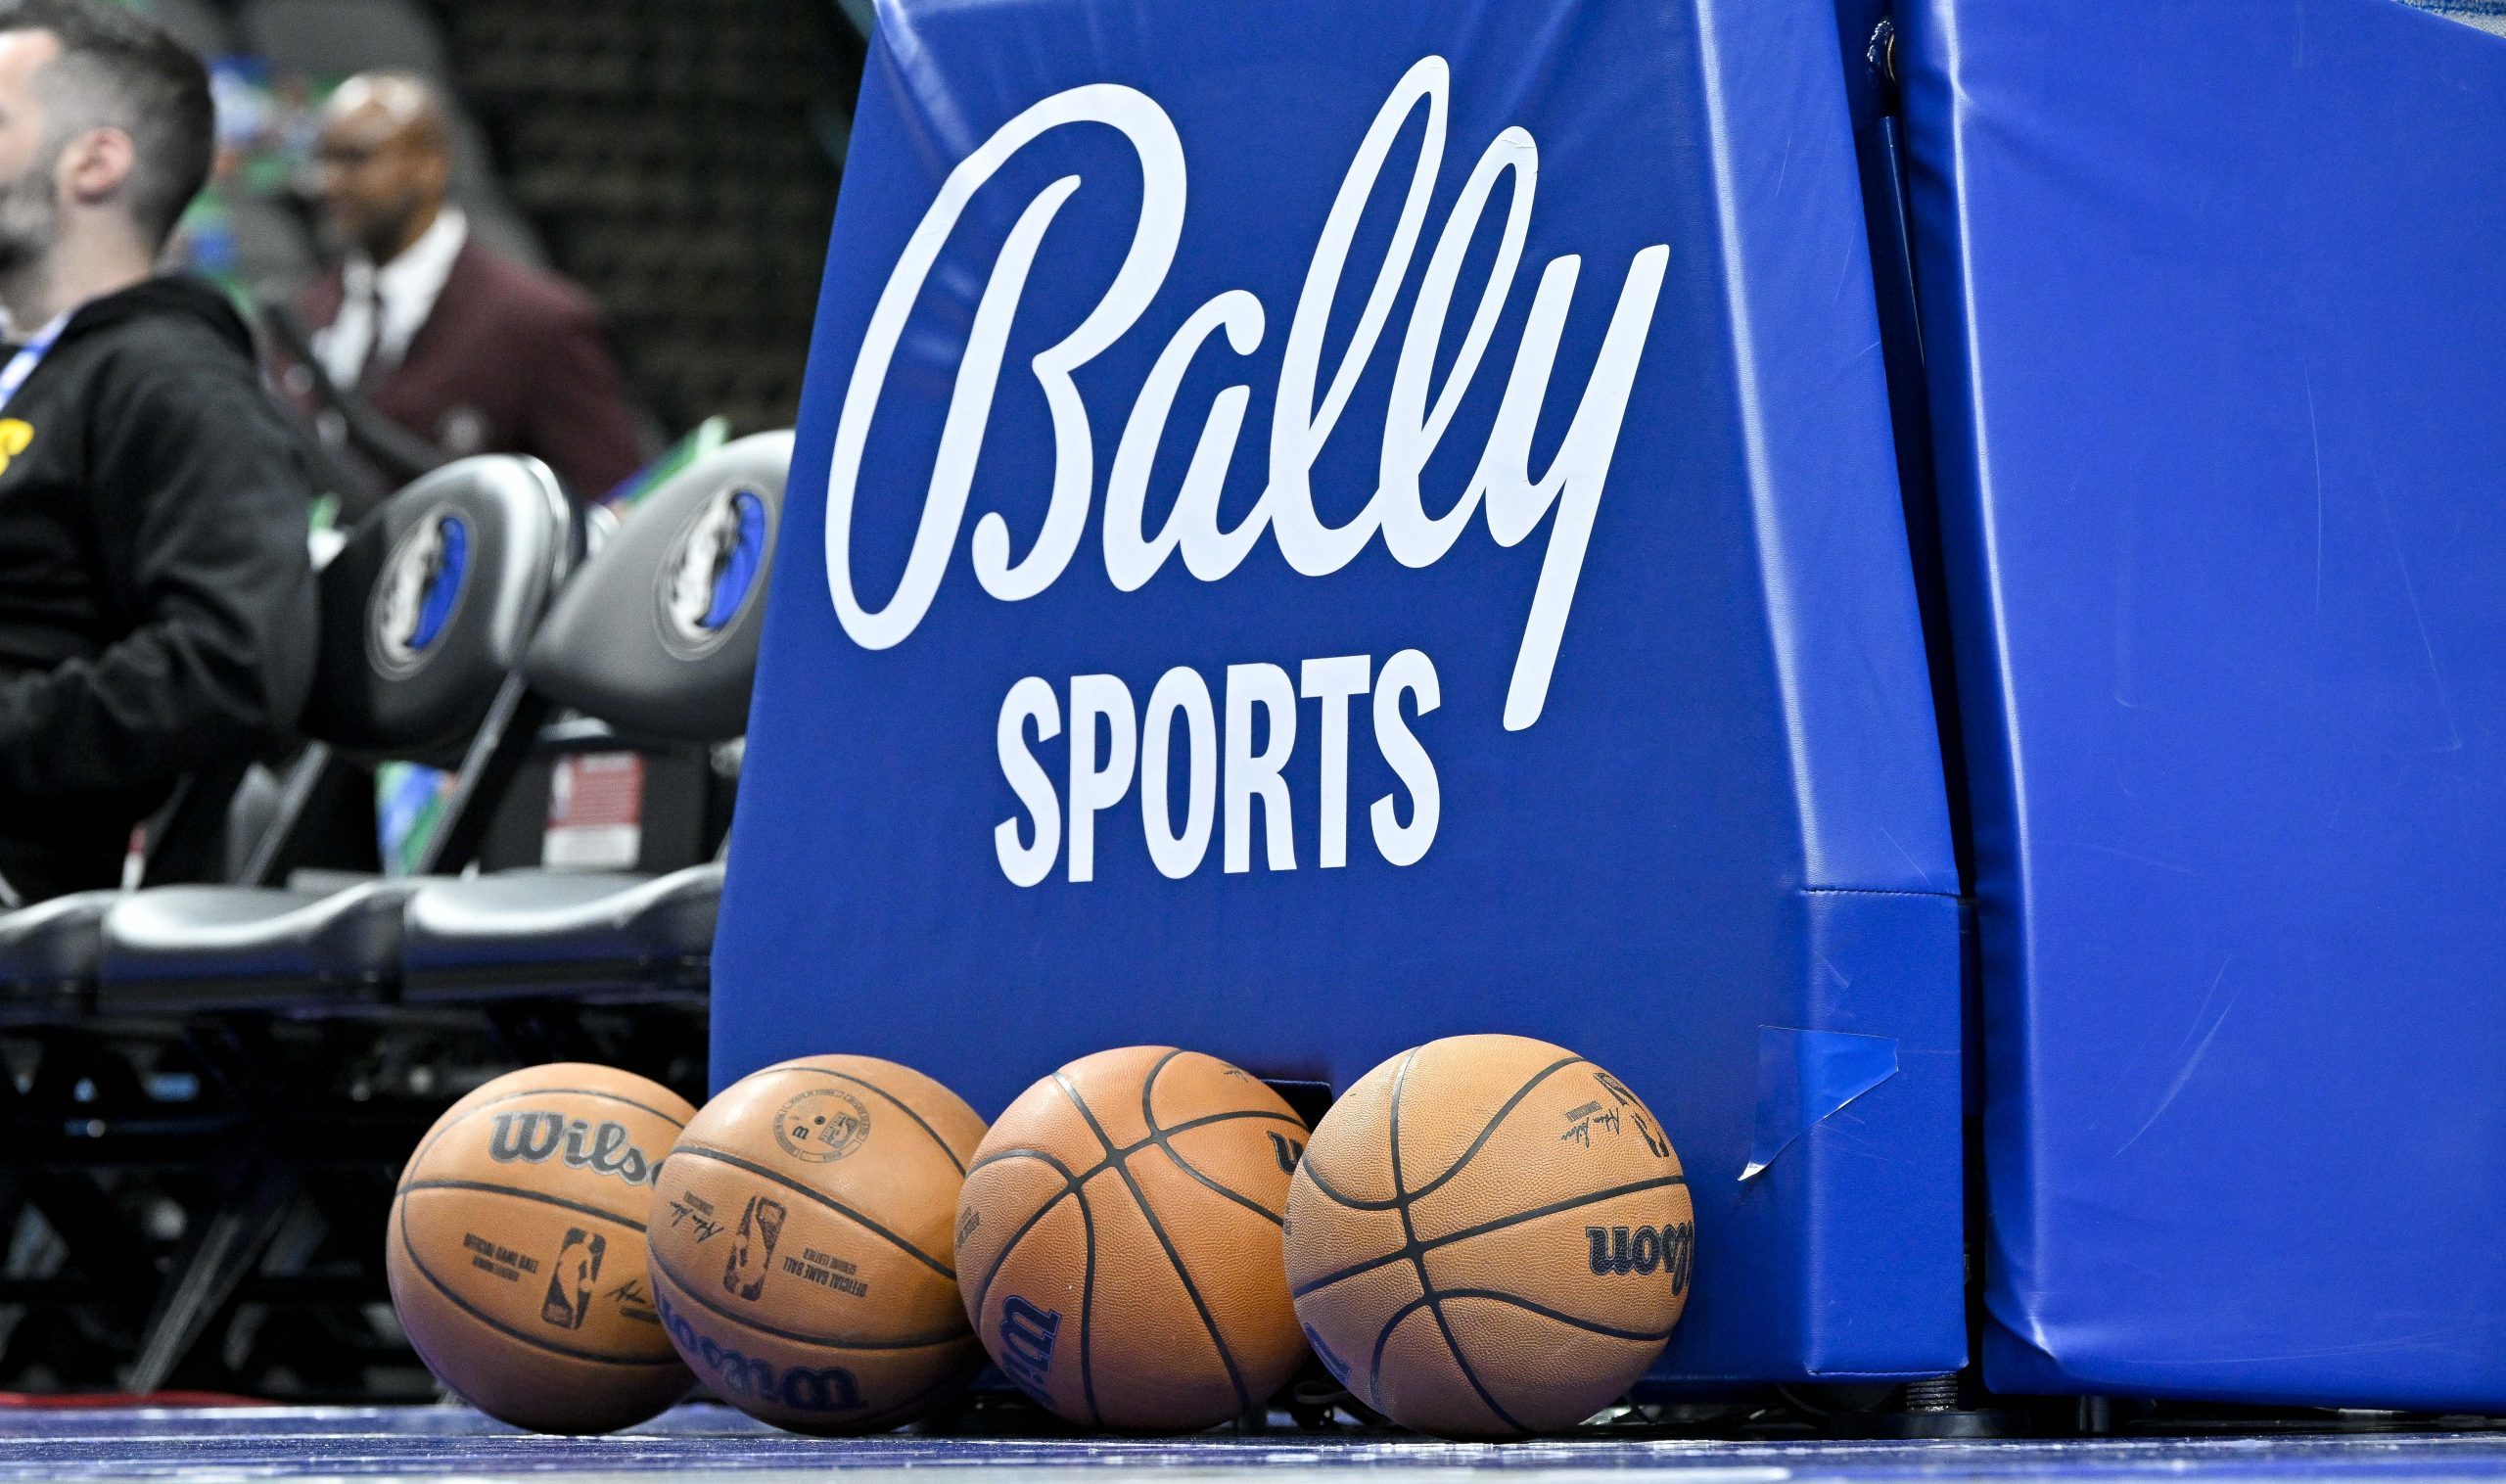 Diamond Sports Group, the parent company of the Bally Sports networks, has filed for Chapter 11 bankruptcy.